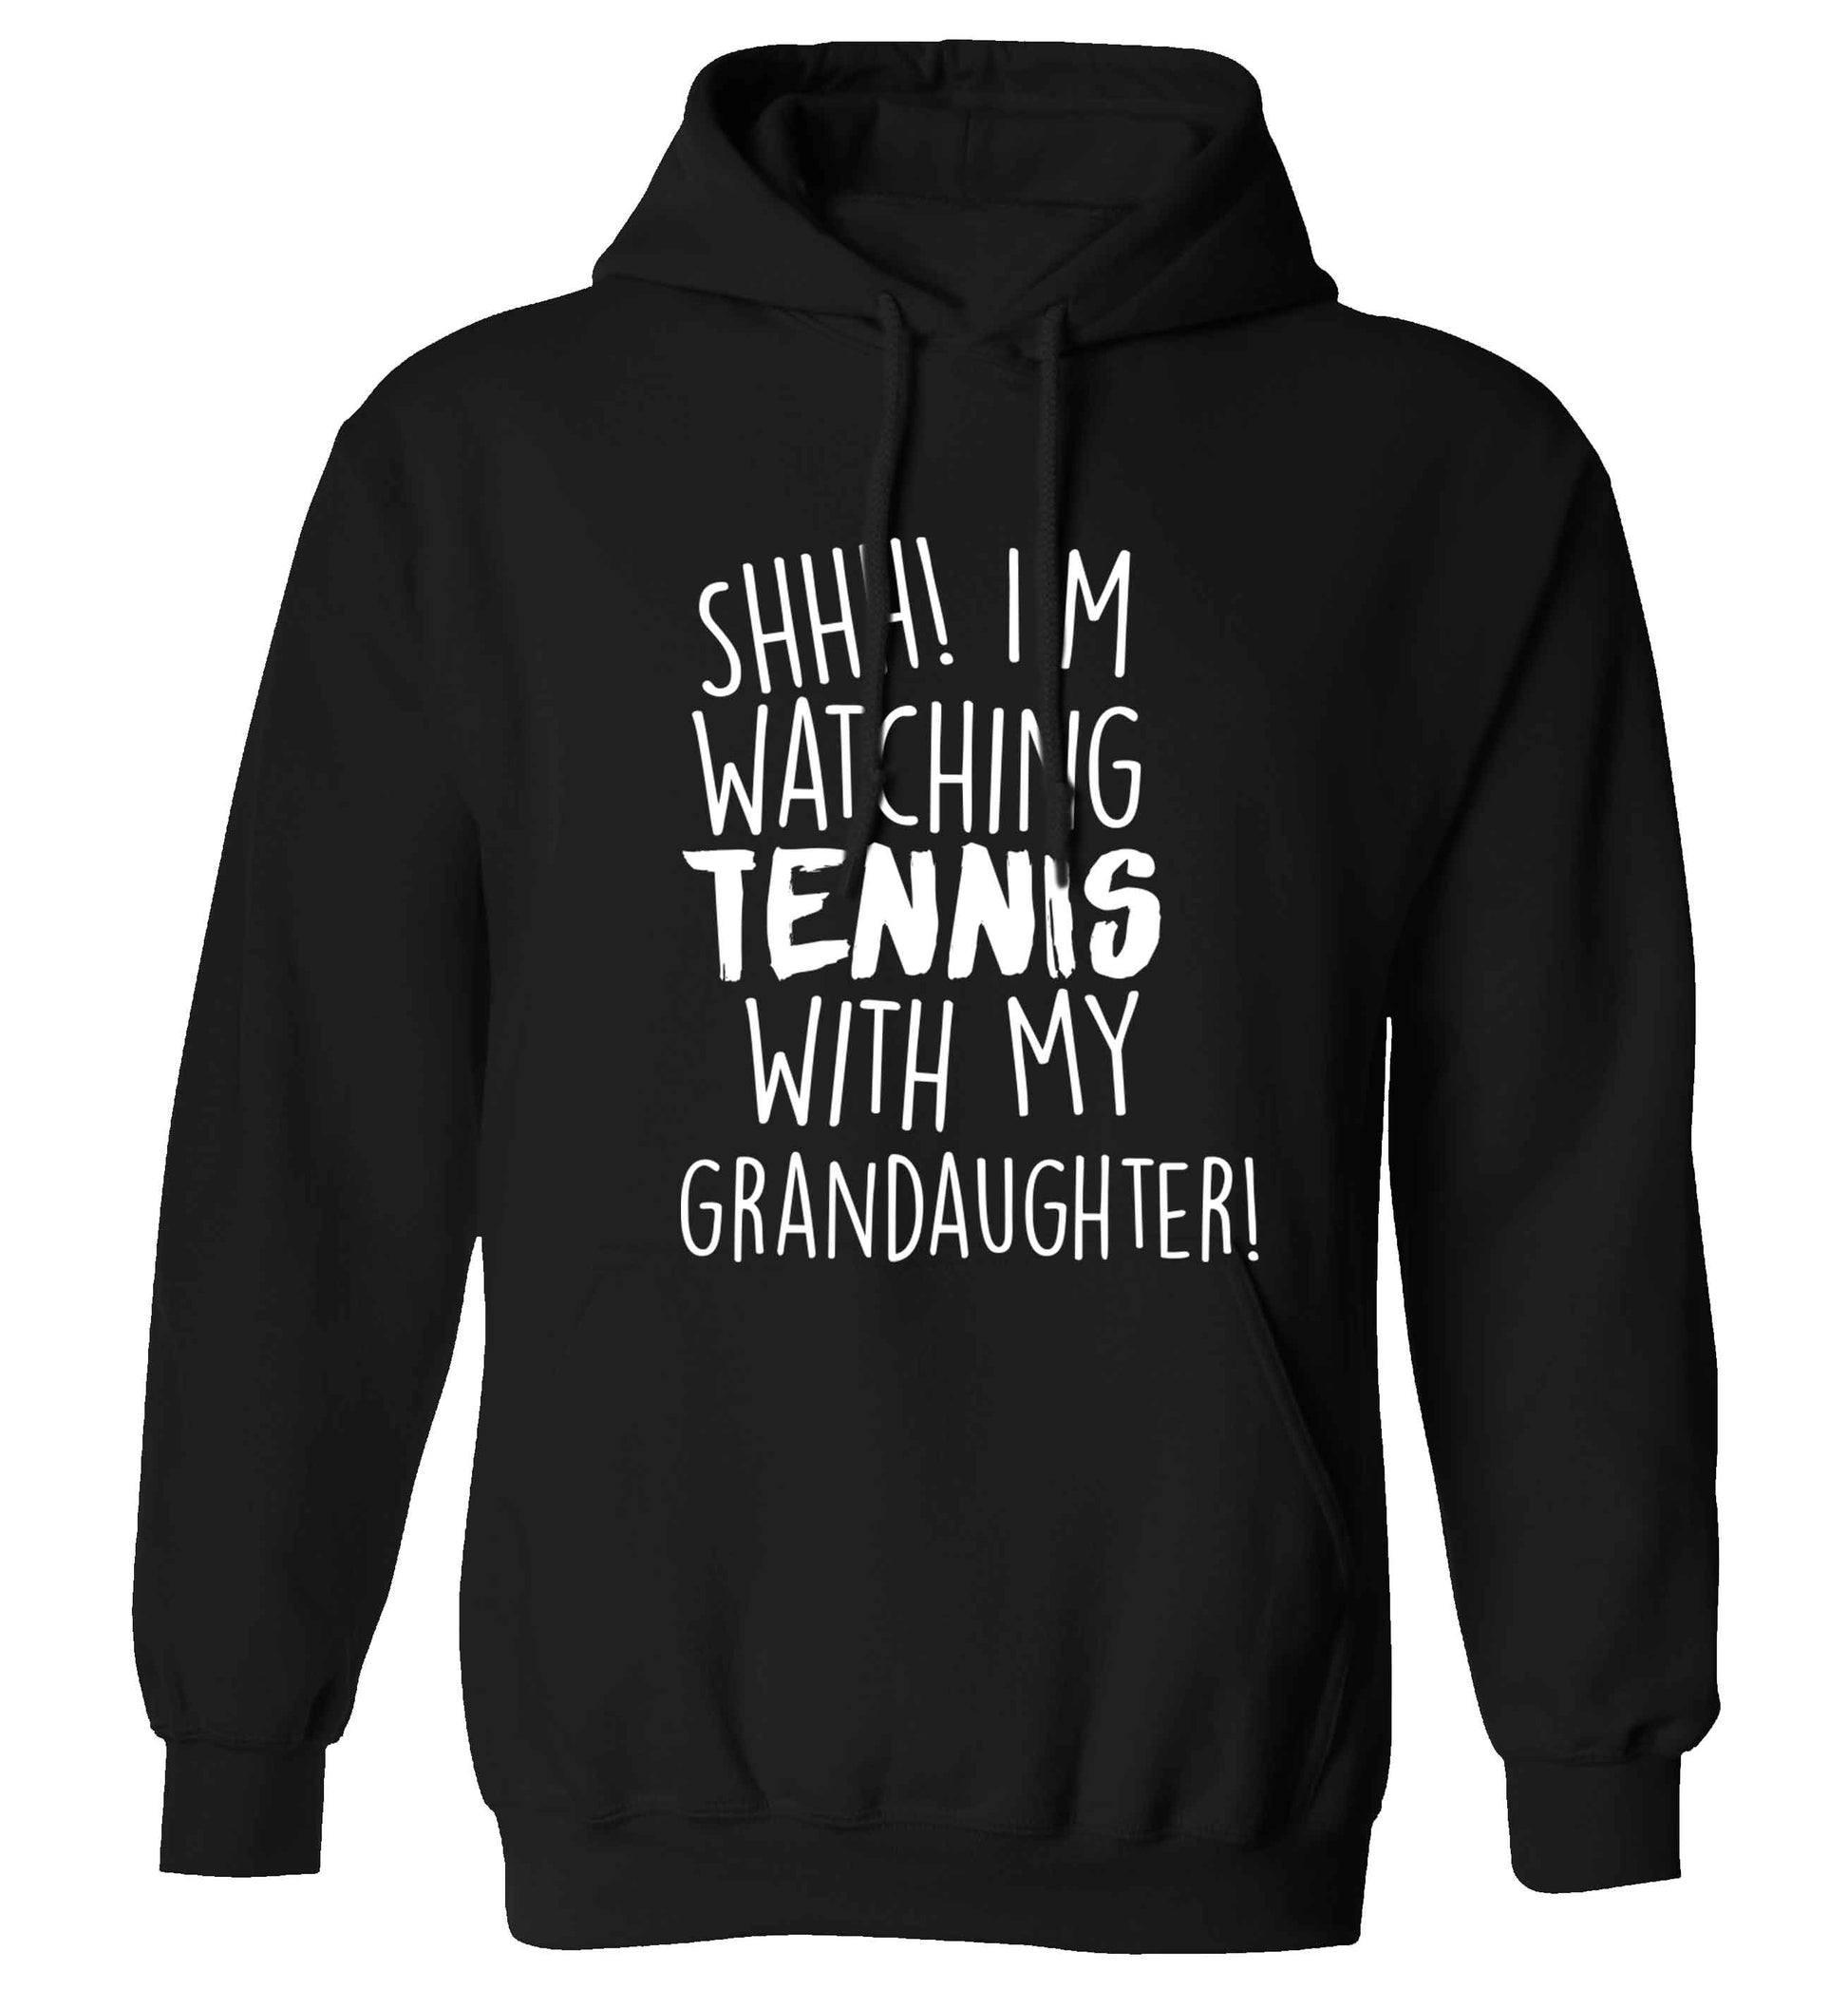 Shh! I'm watching tennis with my granddaughter! adults unisex black hoodie 2XL